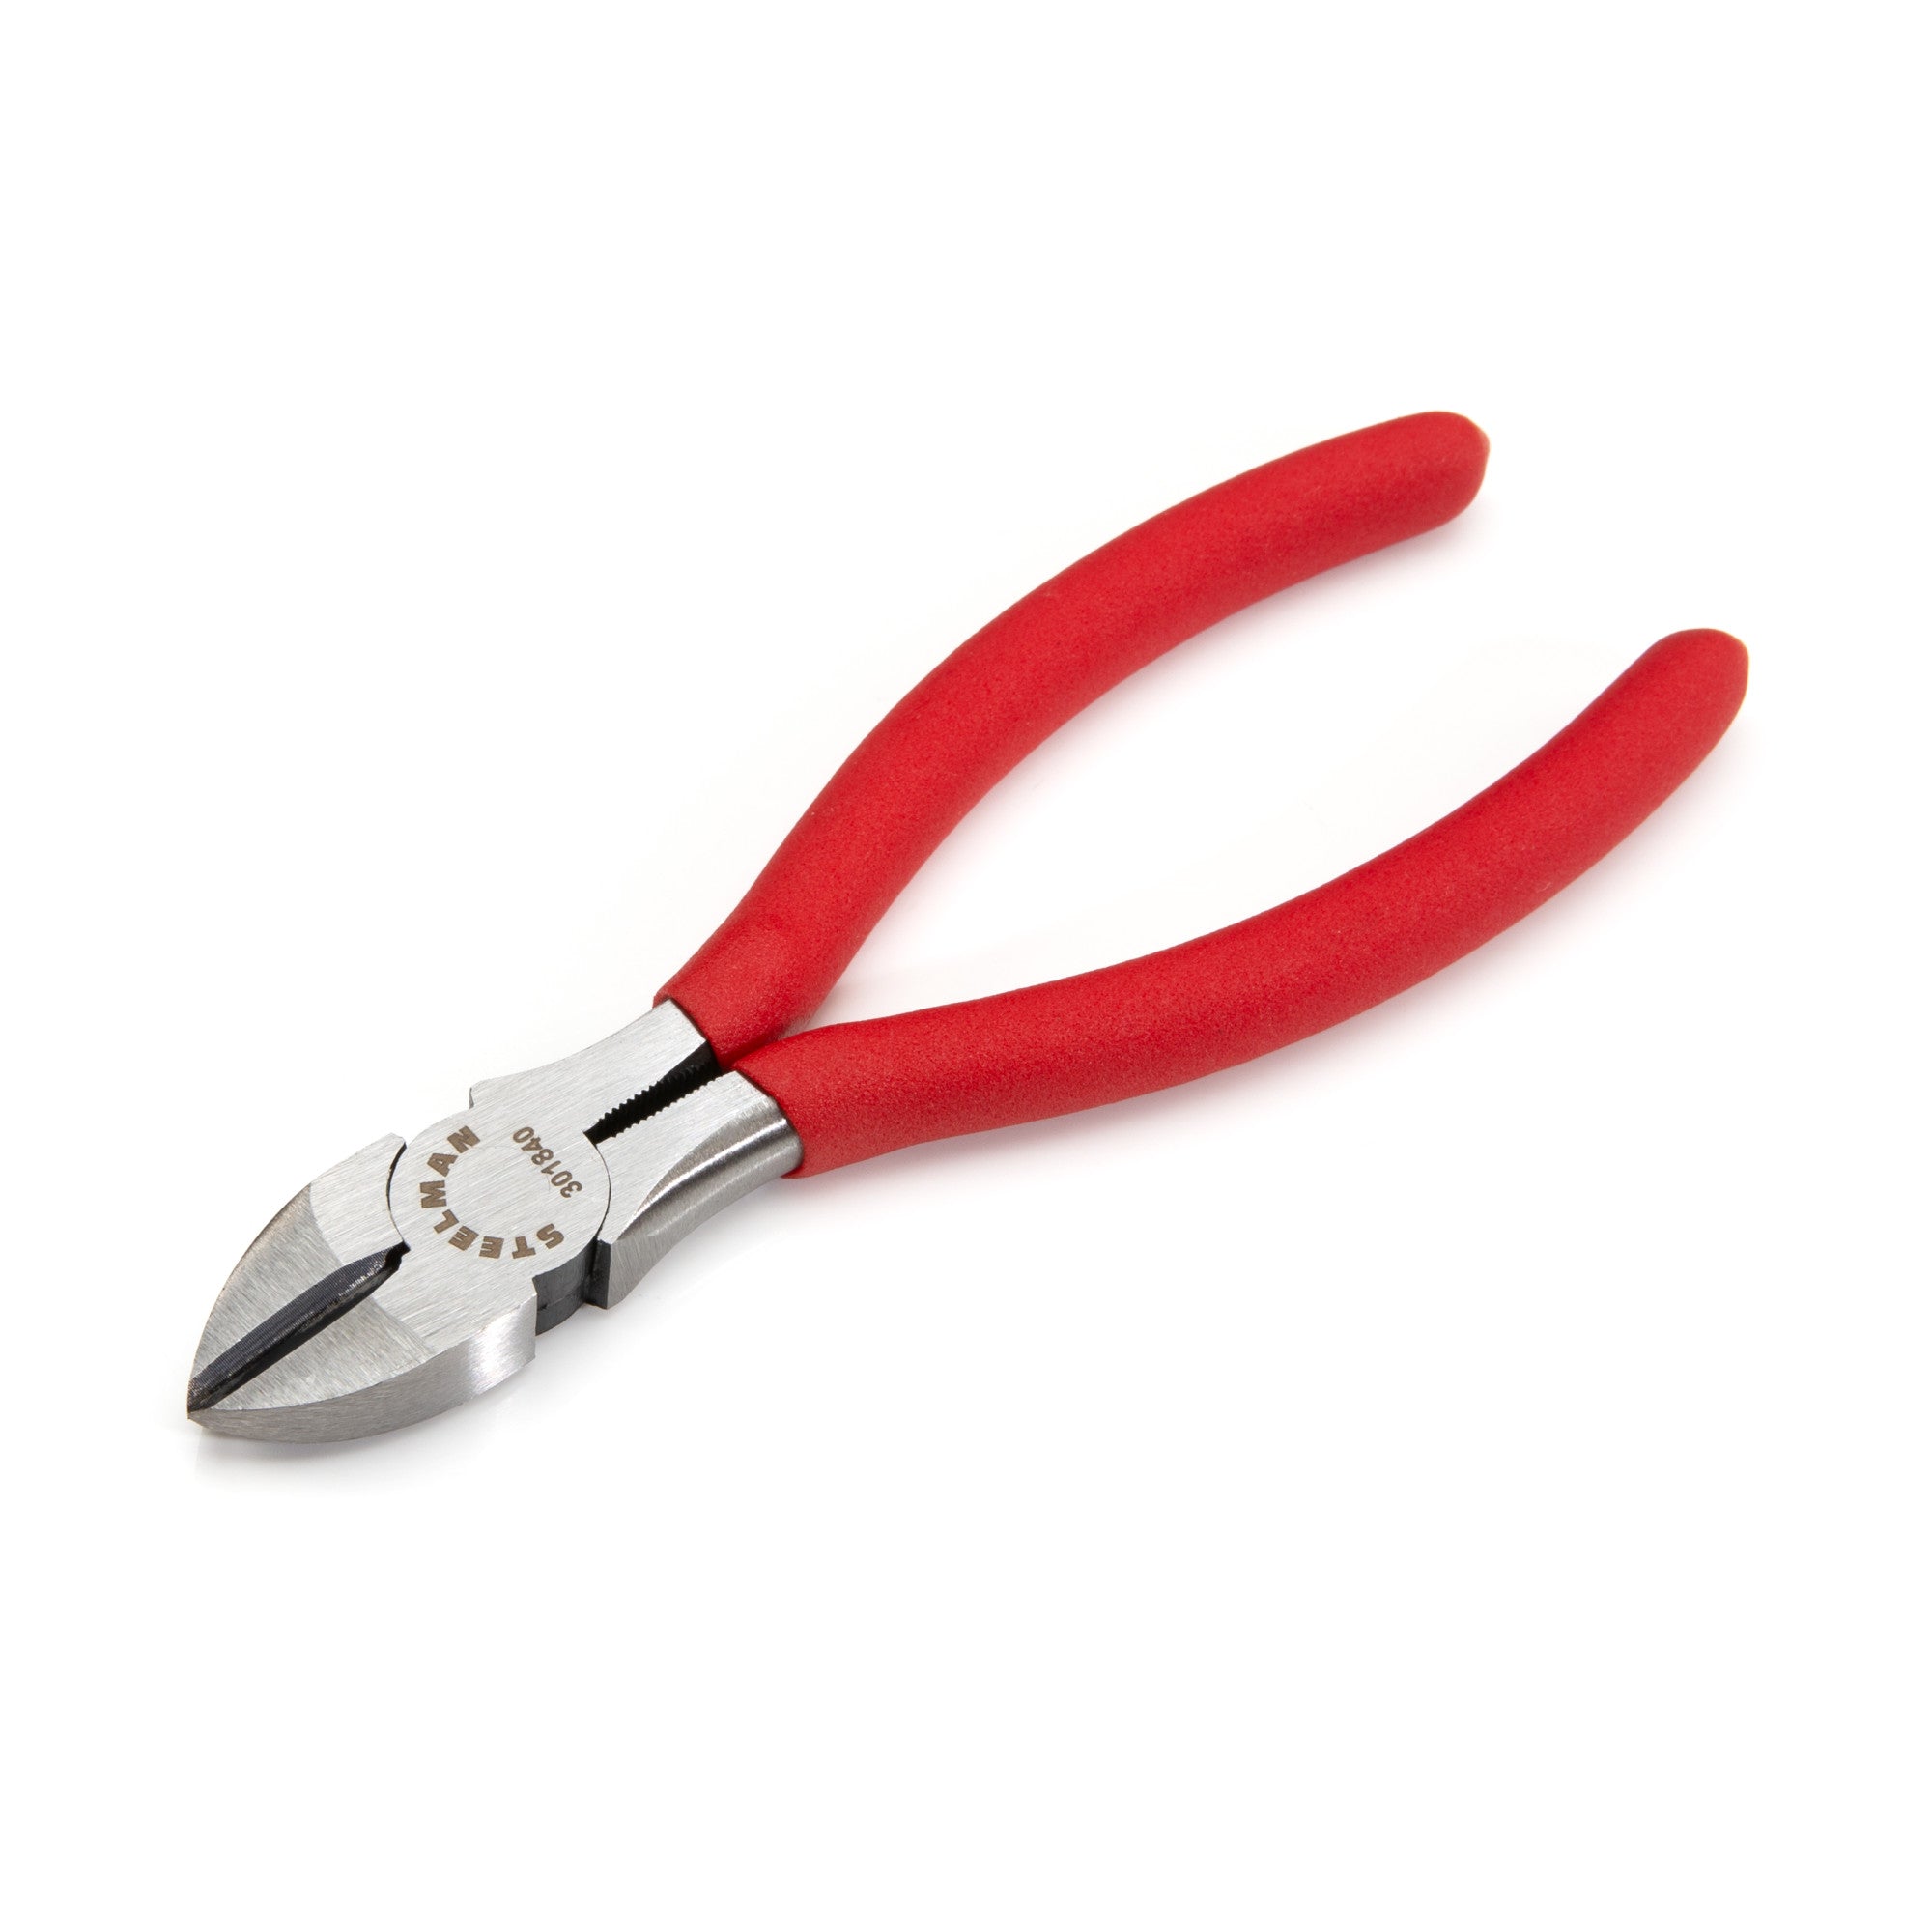 Steelman 6-Inch Diagonal Cutters / Pliers With Wire Puller